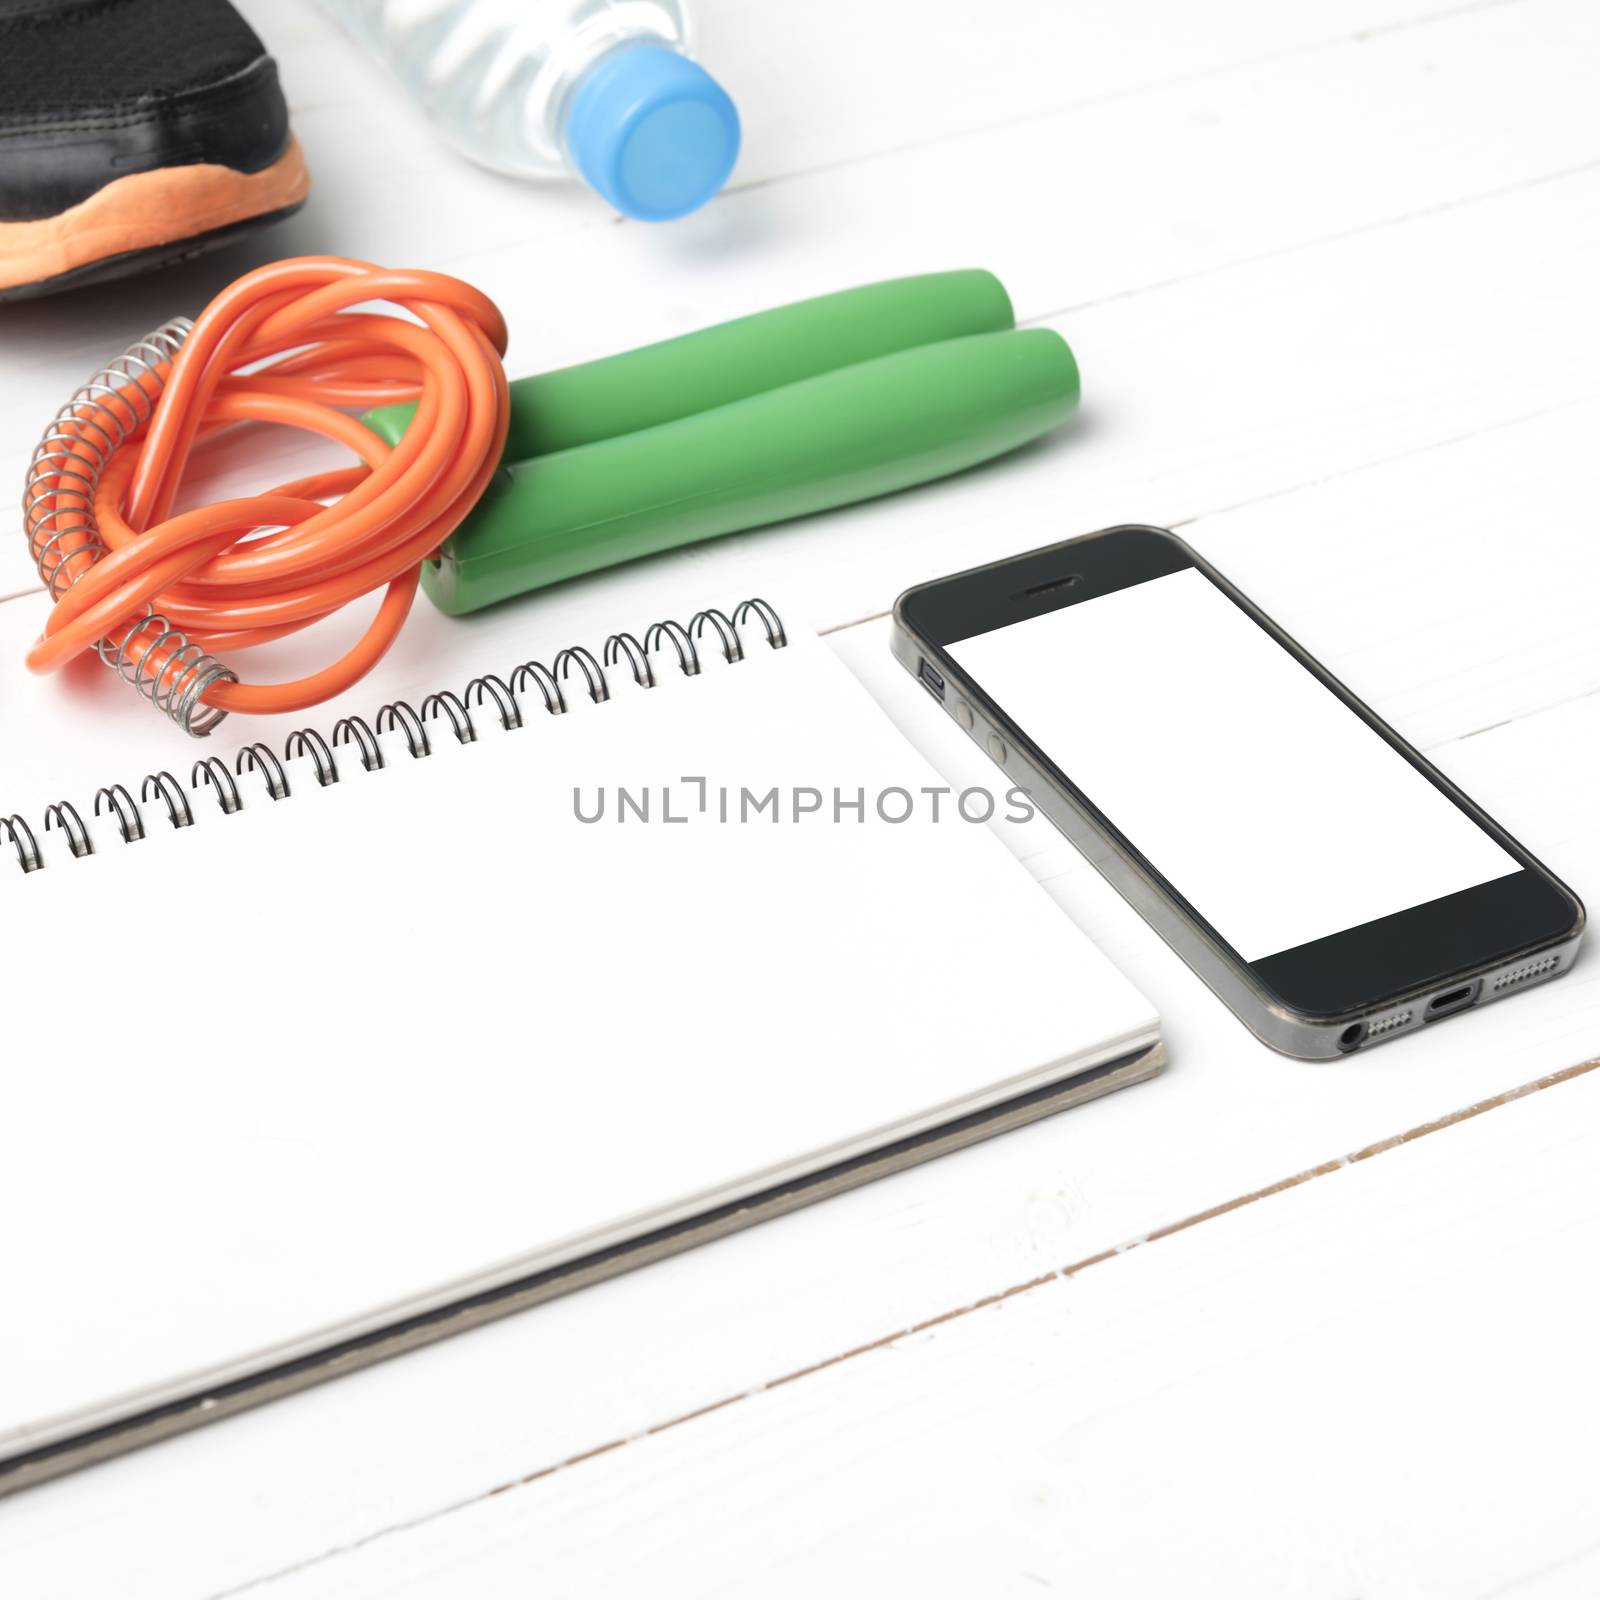 fitness equipment : running shoes,jumping rope,drinking water,notebook and phone on white wood table